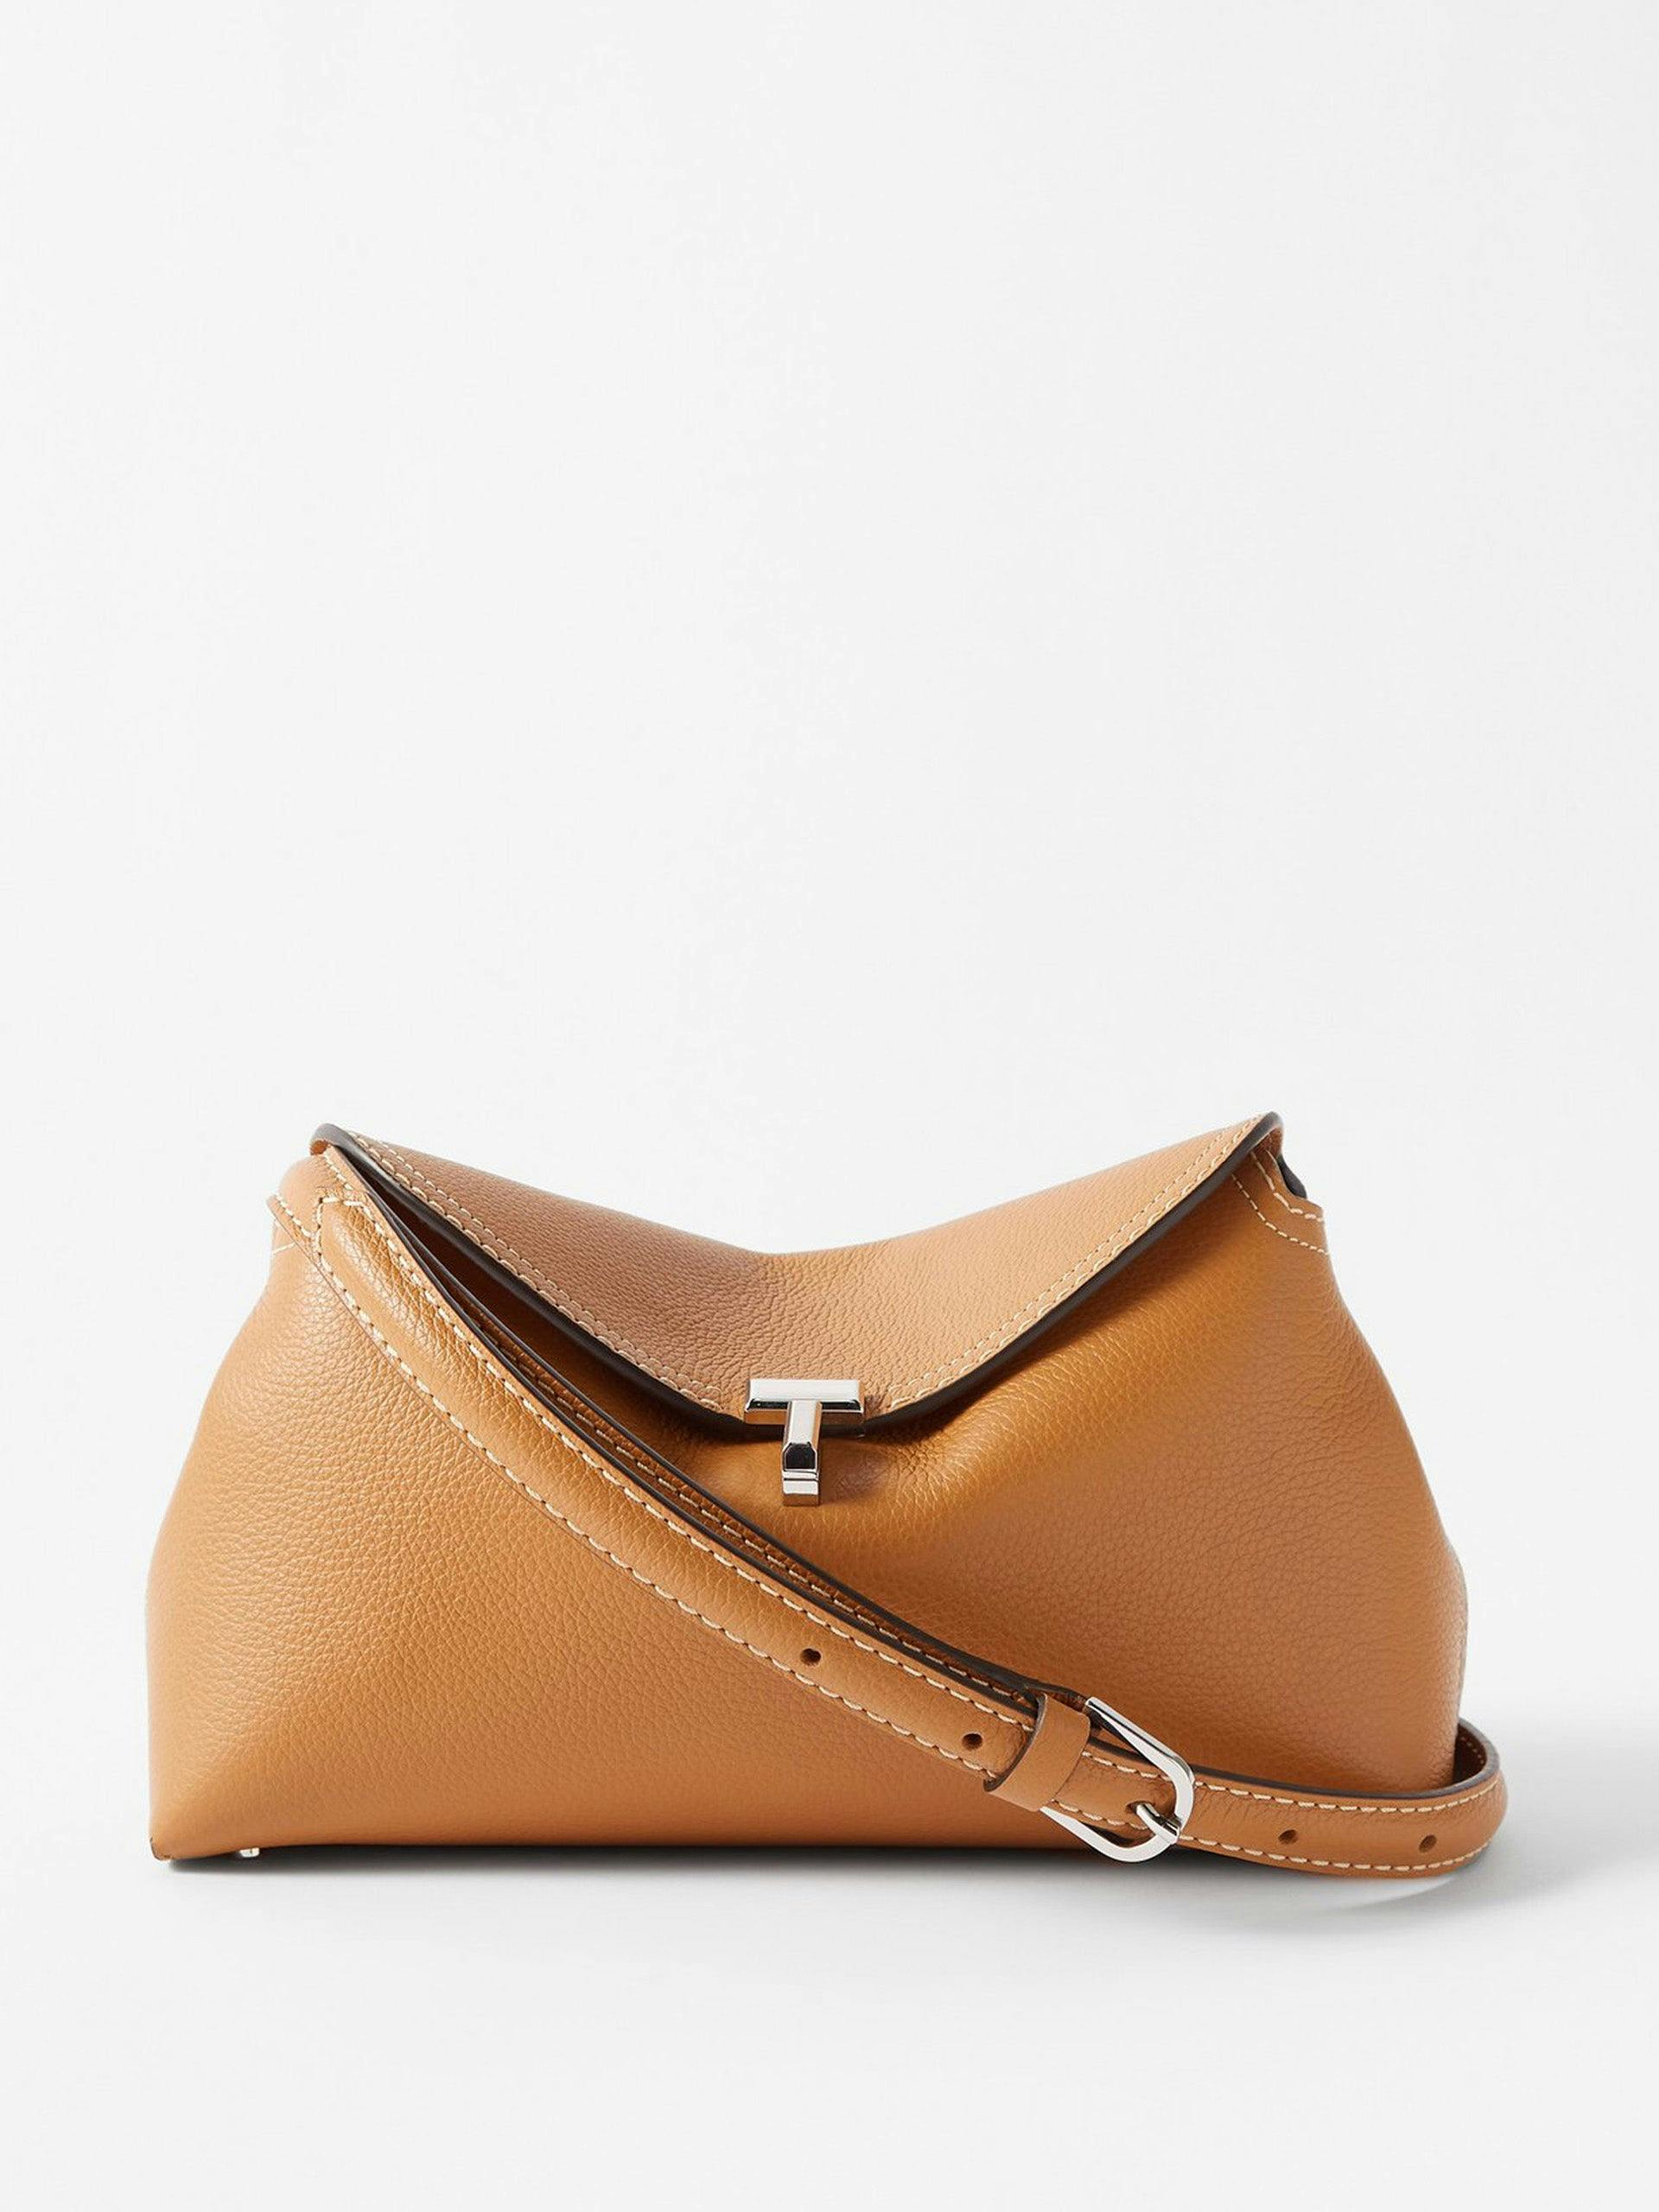 T-Lock small grained-leather crossbody bag